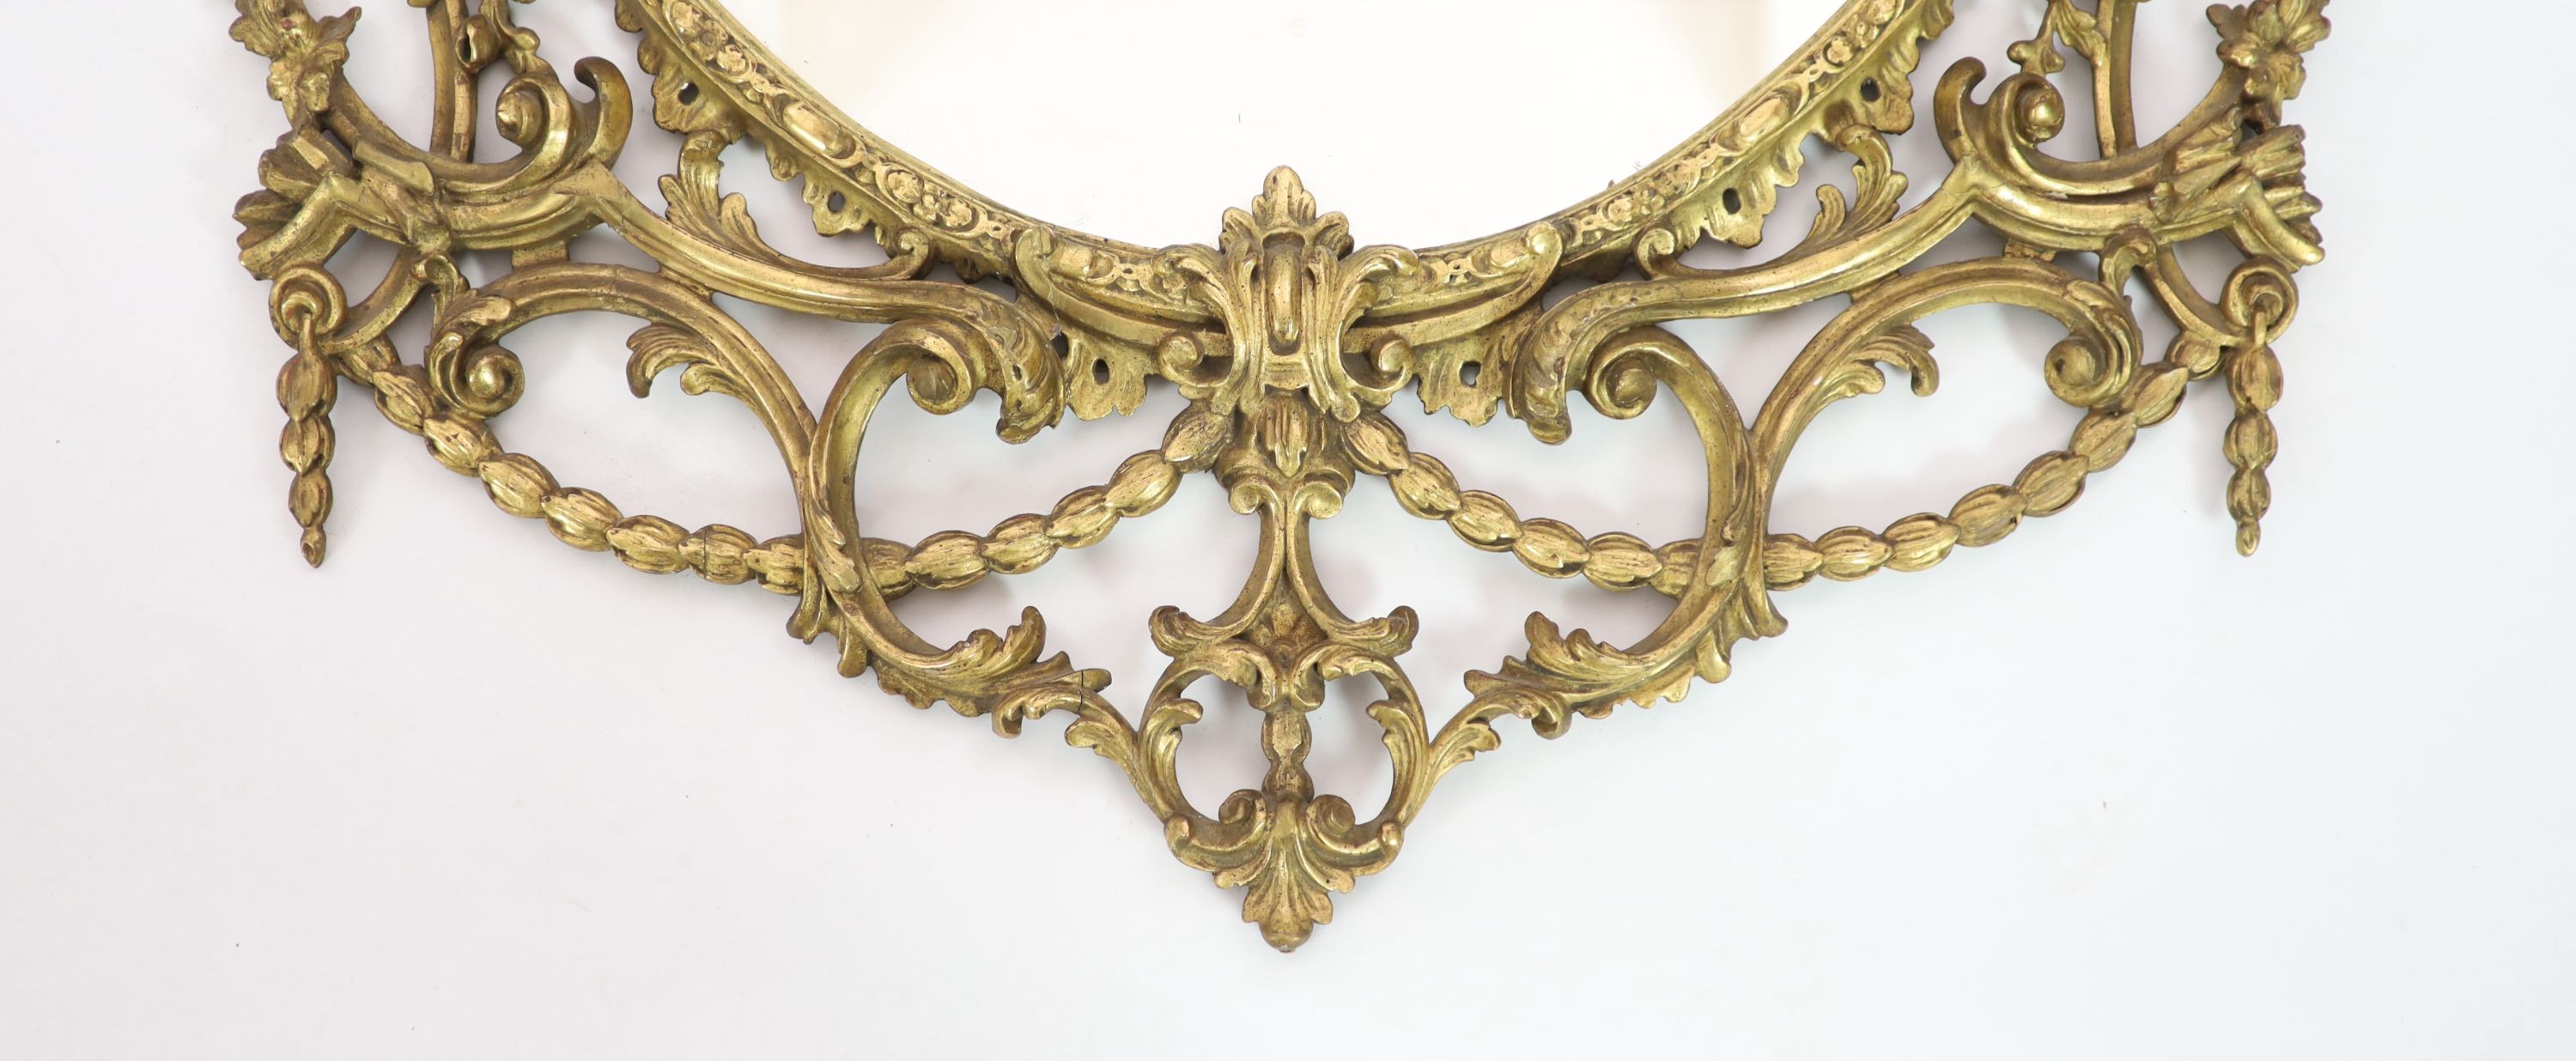 A 19th century Chippendale style gilt and gesso wall mirrorwith ornate foliate scroll frame capped - Image 2 of 5